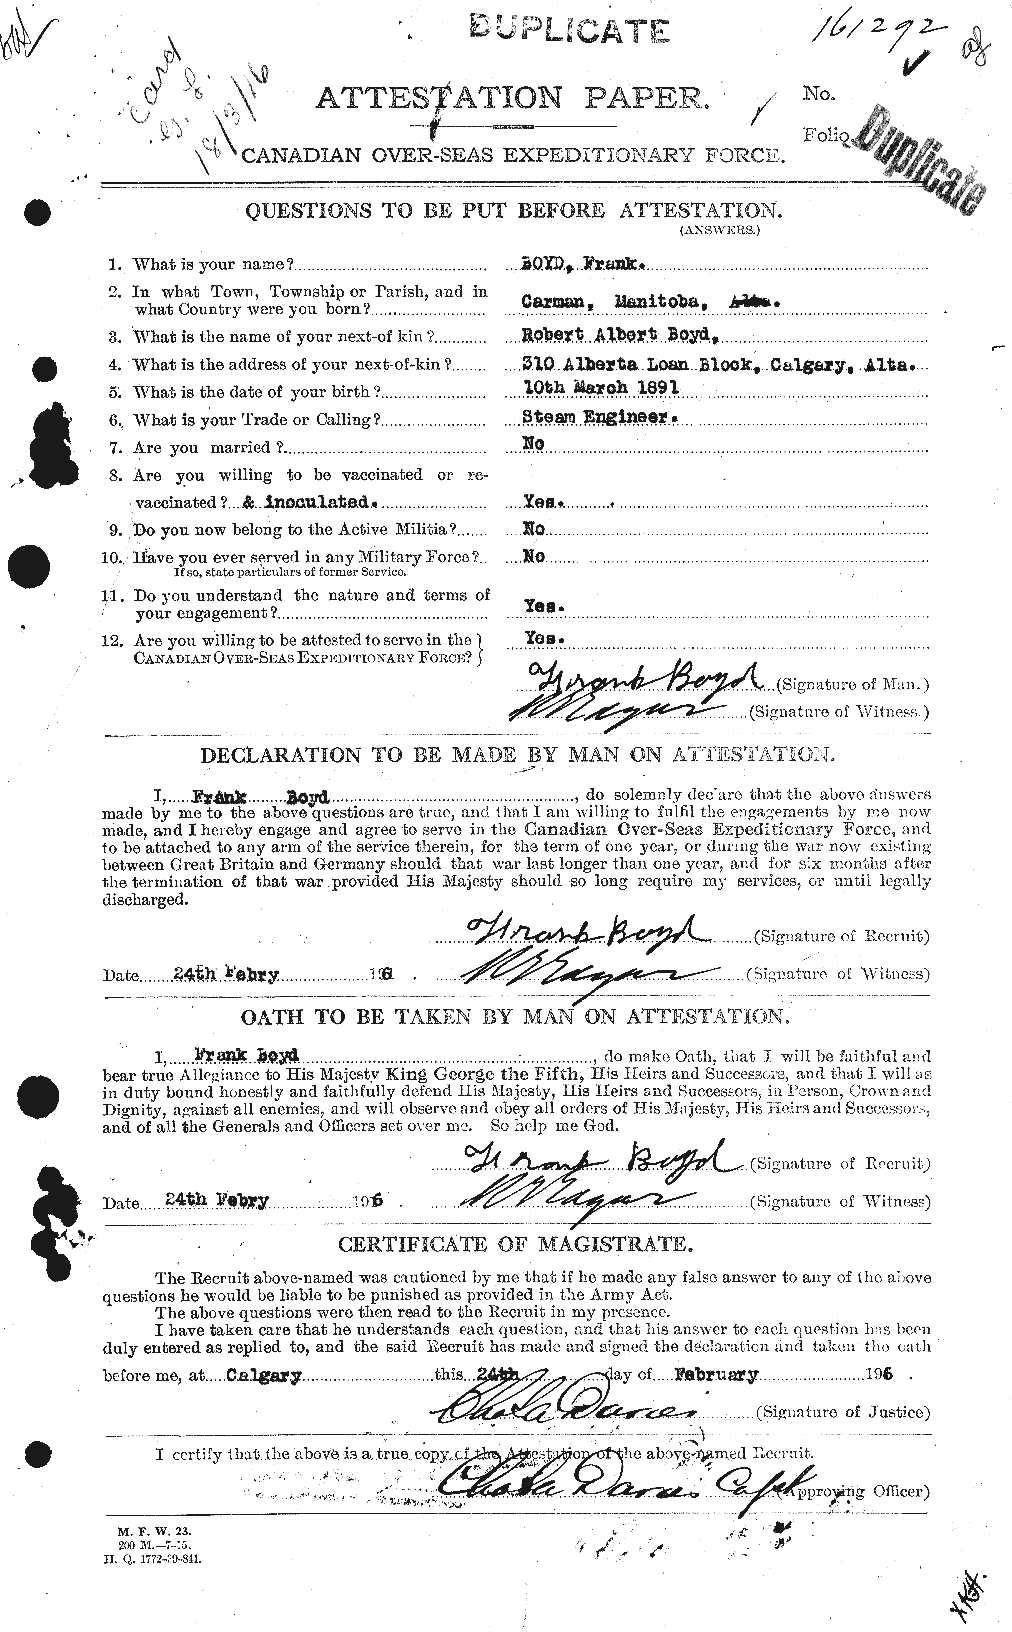 Personnel Records of the First World War - CEF 256973a